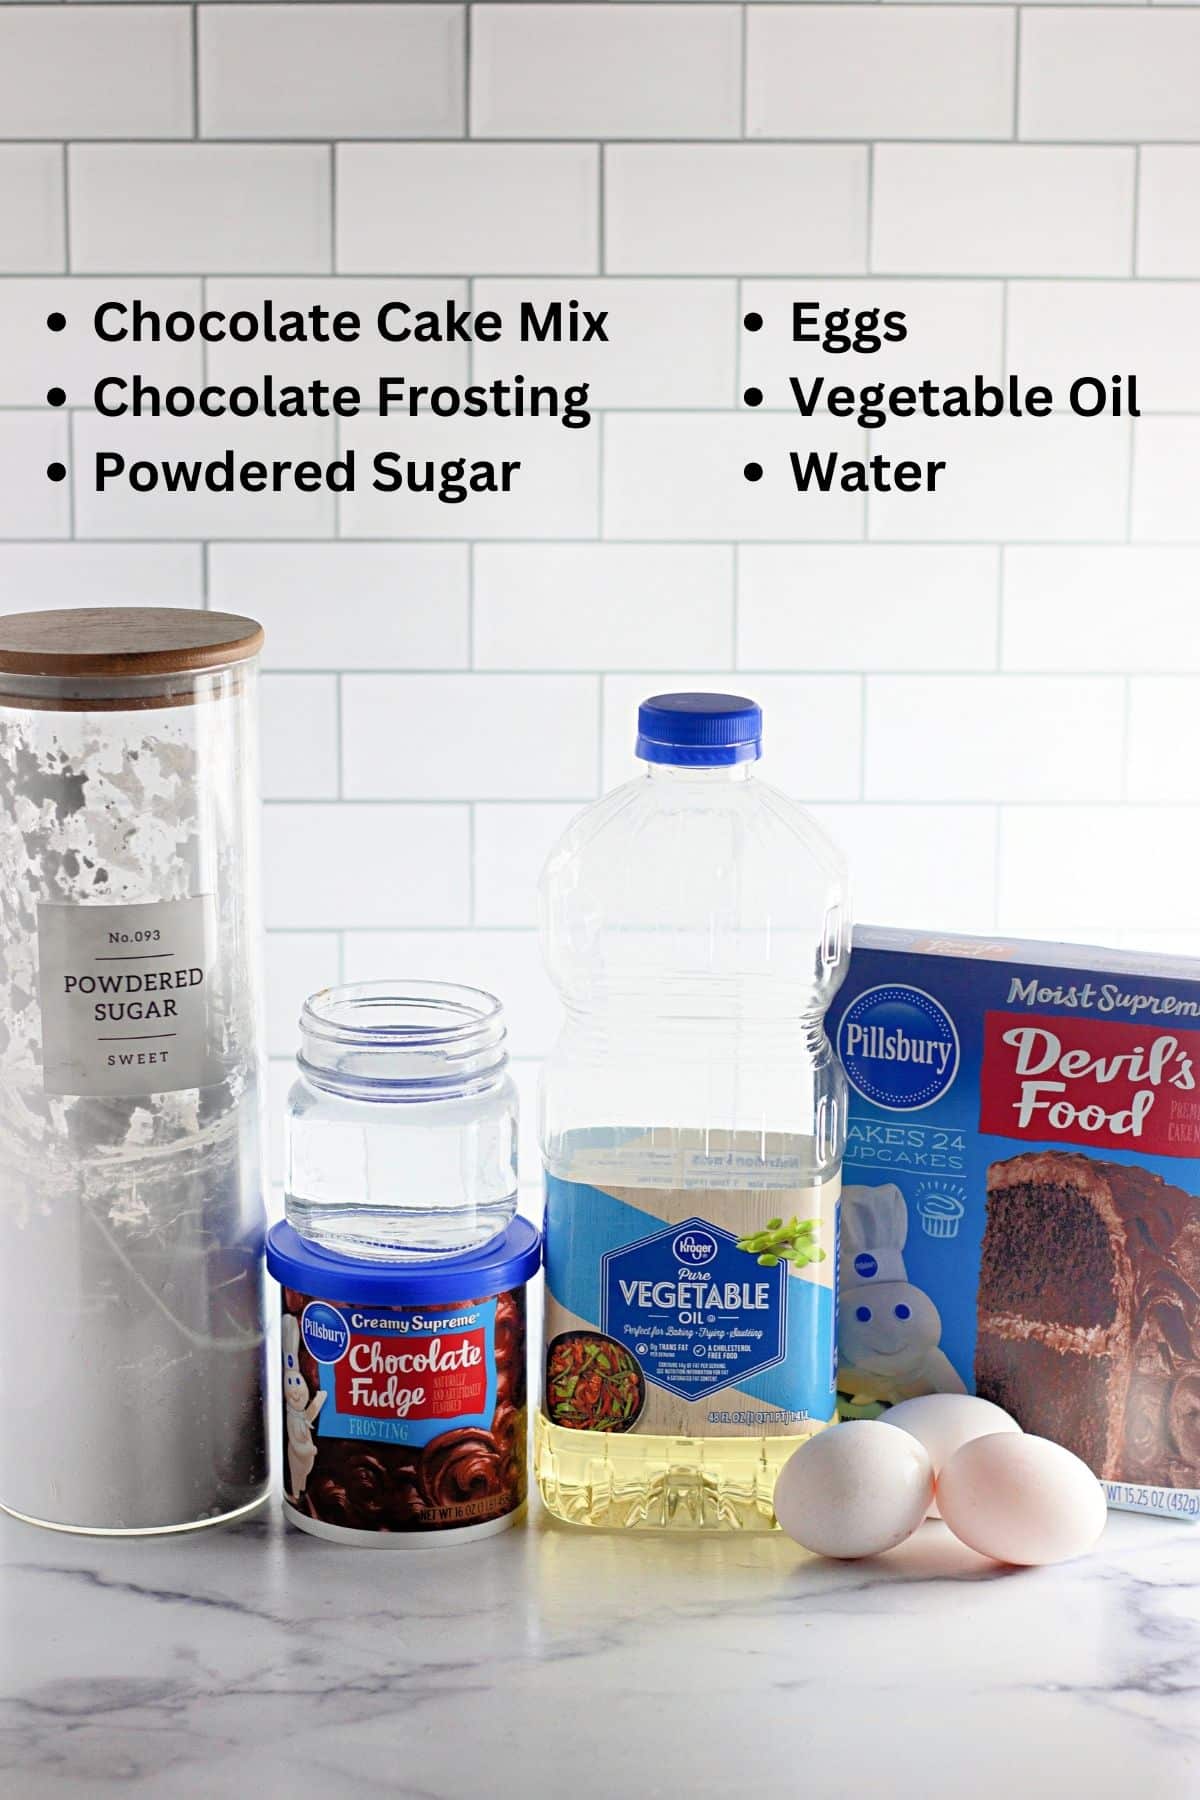 Ingredients shown to make microwave chocolate cake. 